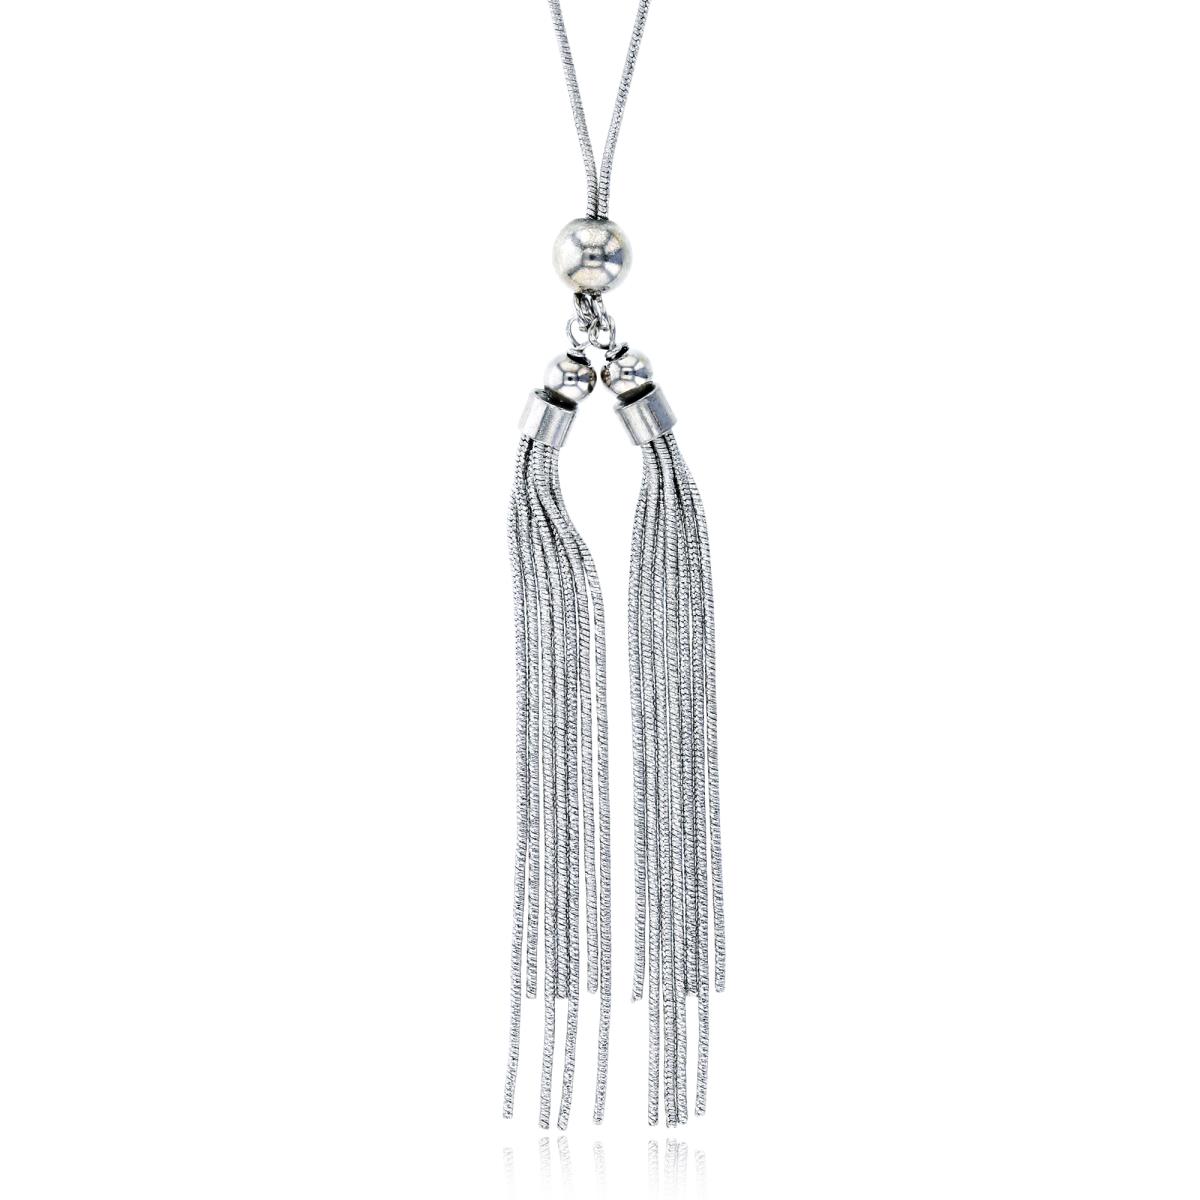 Sterling Silver Rhodium 2-Tassels w Sliding Ball on RD Snake Chain 24"Necklace